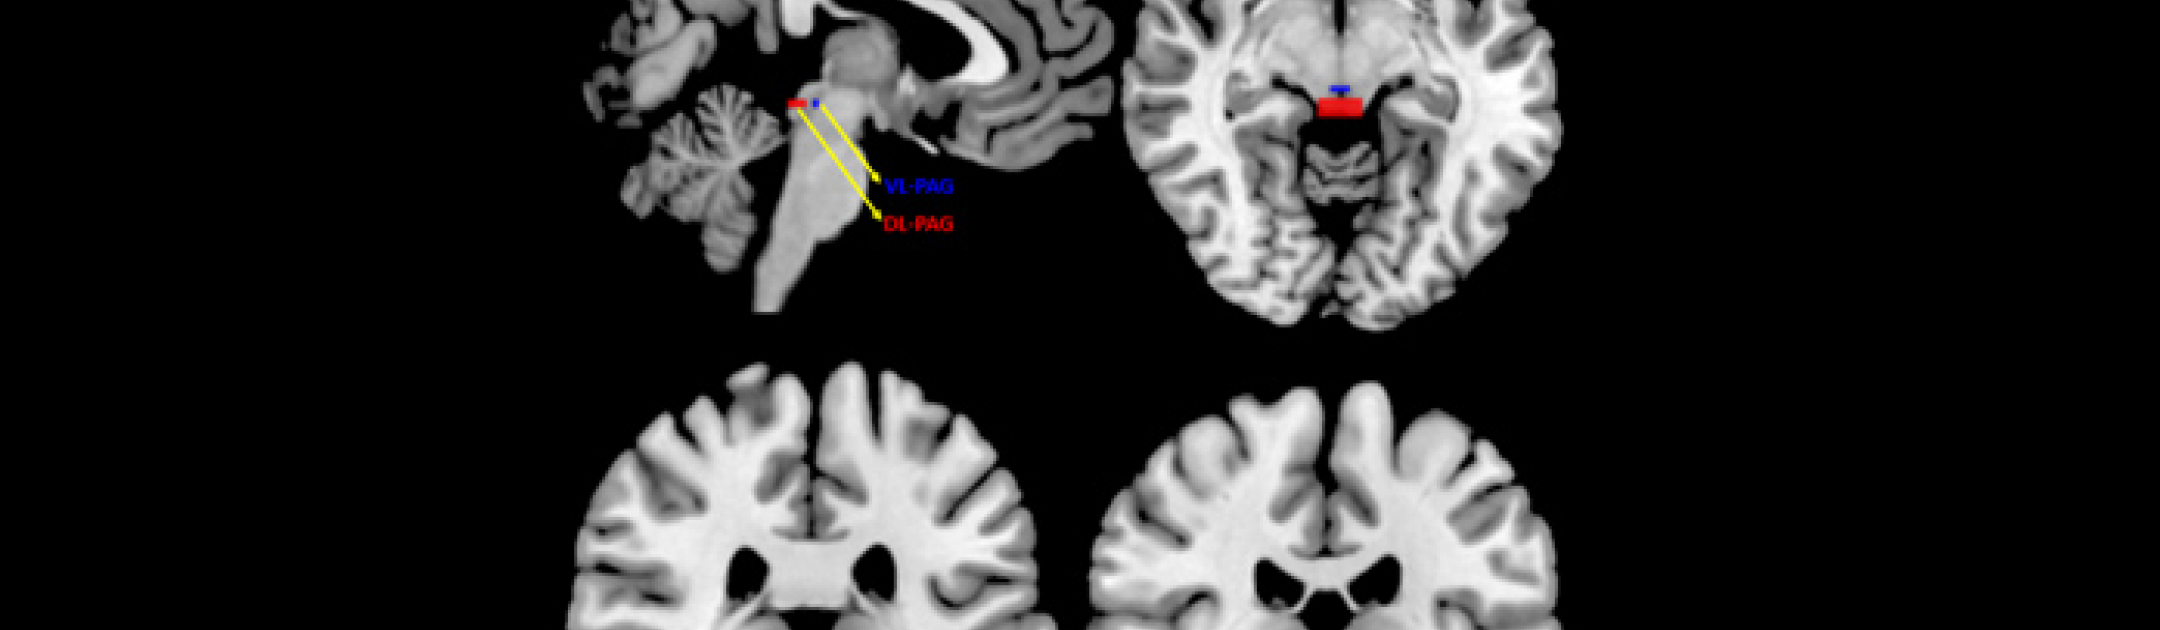 Brain scans showing the PAG region that was studied